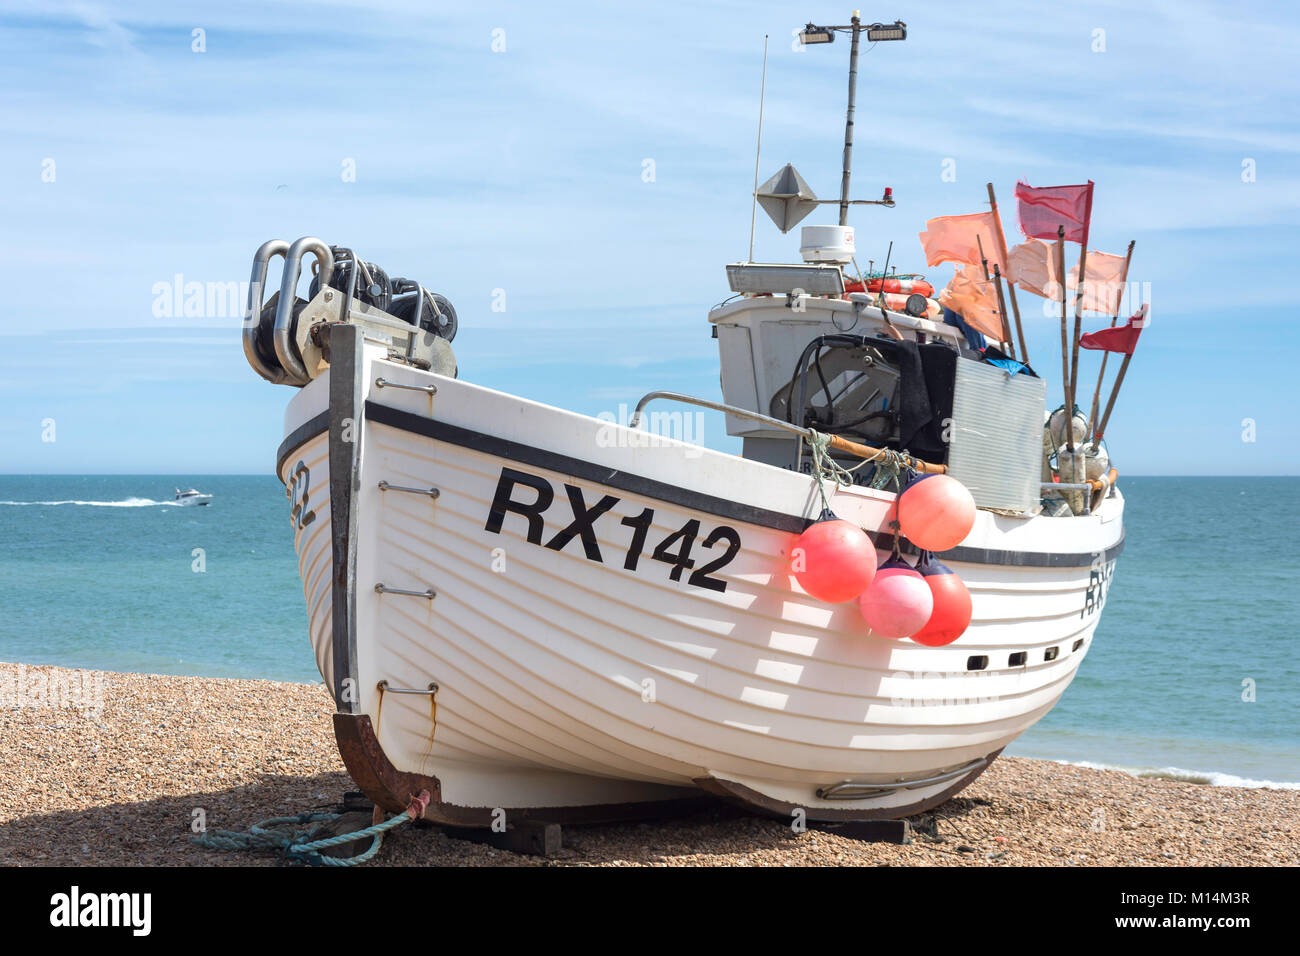 Fishing boat on Rock-a-Nore Beach, Hastings, East Sussex, England, United Kingdom Stock Photo